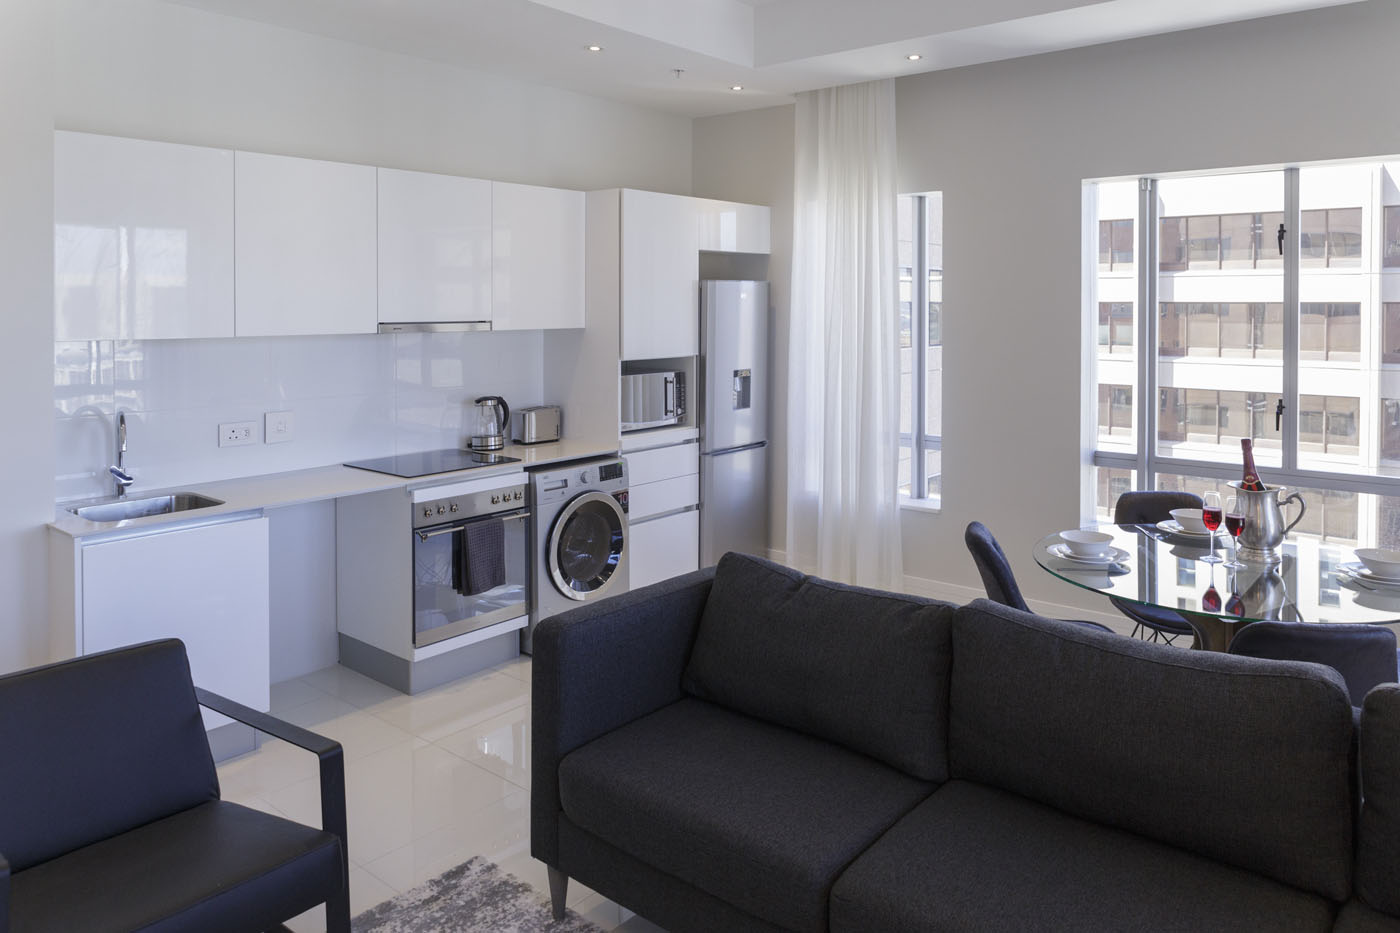 Photo 15 of Triangle Suites 2012 accommodation in City Centre, Cape Town with 2 bedrooms and 2 bathrooms